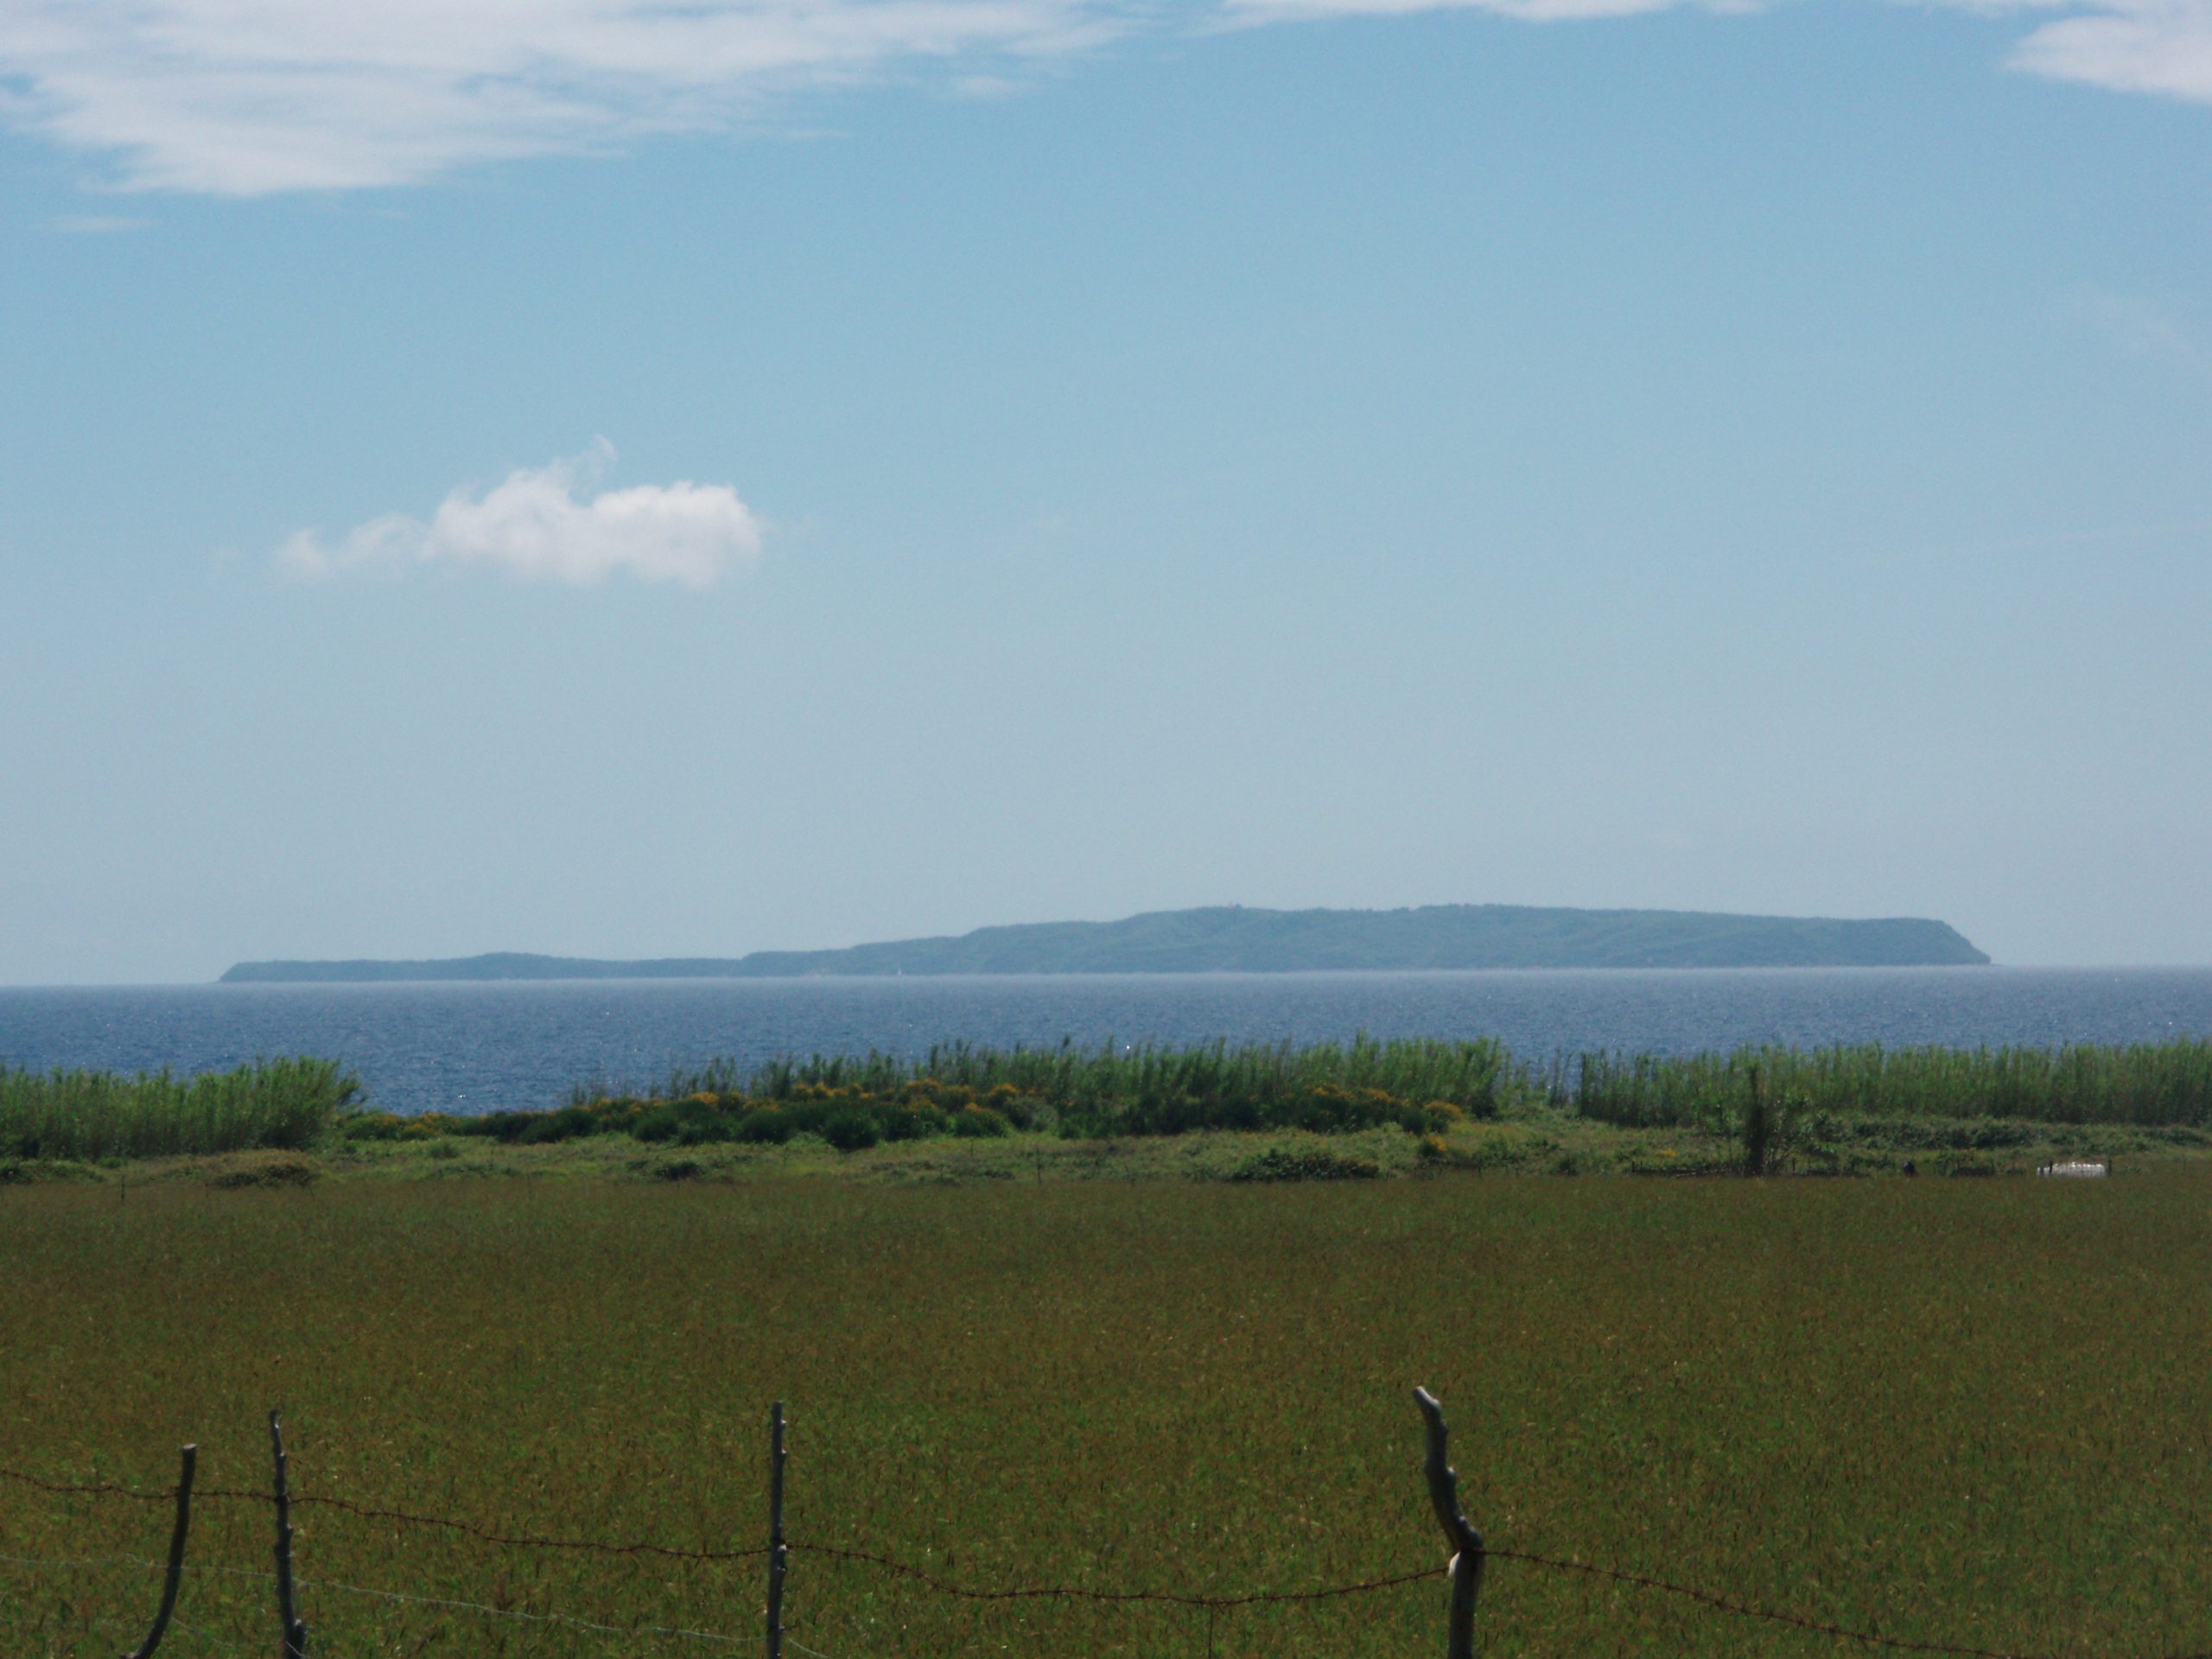 Outlines of Susak as seen from Unije. The tall grass has replaced tiled fields – a consequence of deagrarization that has affected small Croatian islands.